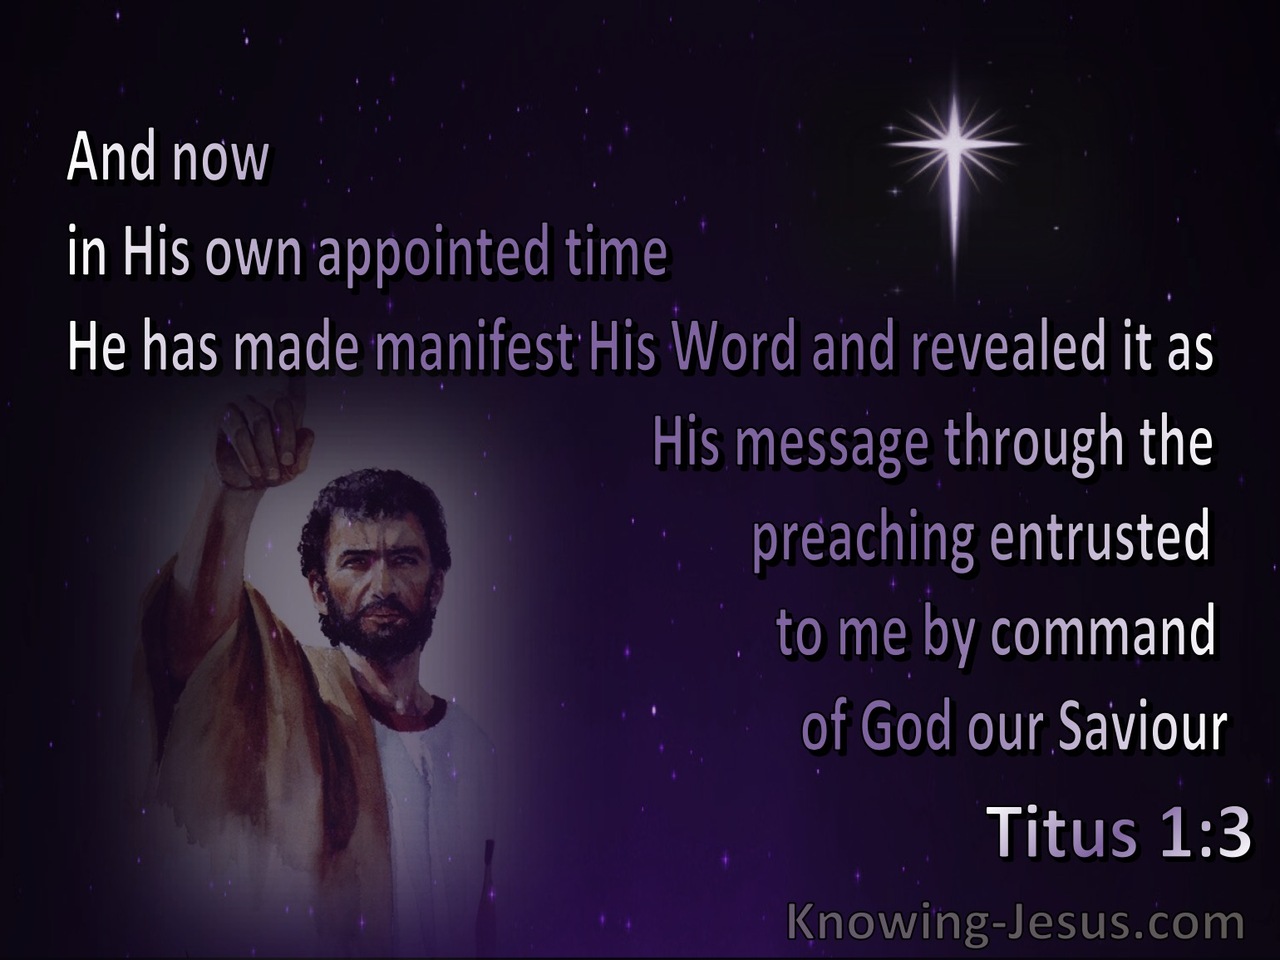 Titus 1:3 At His Own Appointed Time He Manifest His Word (purple) 